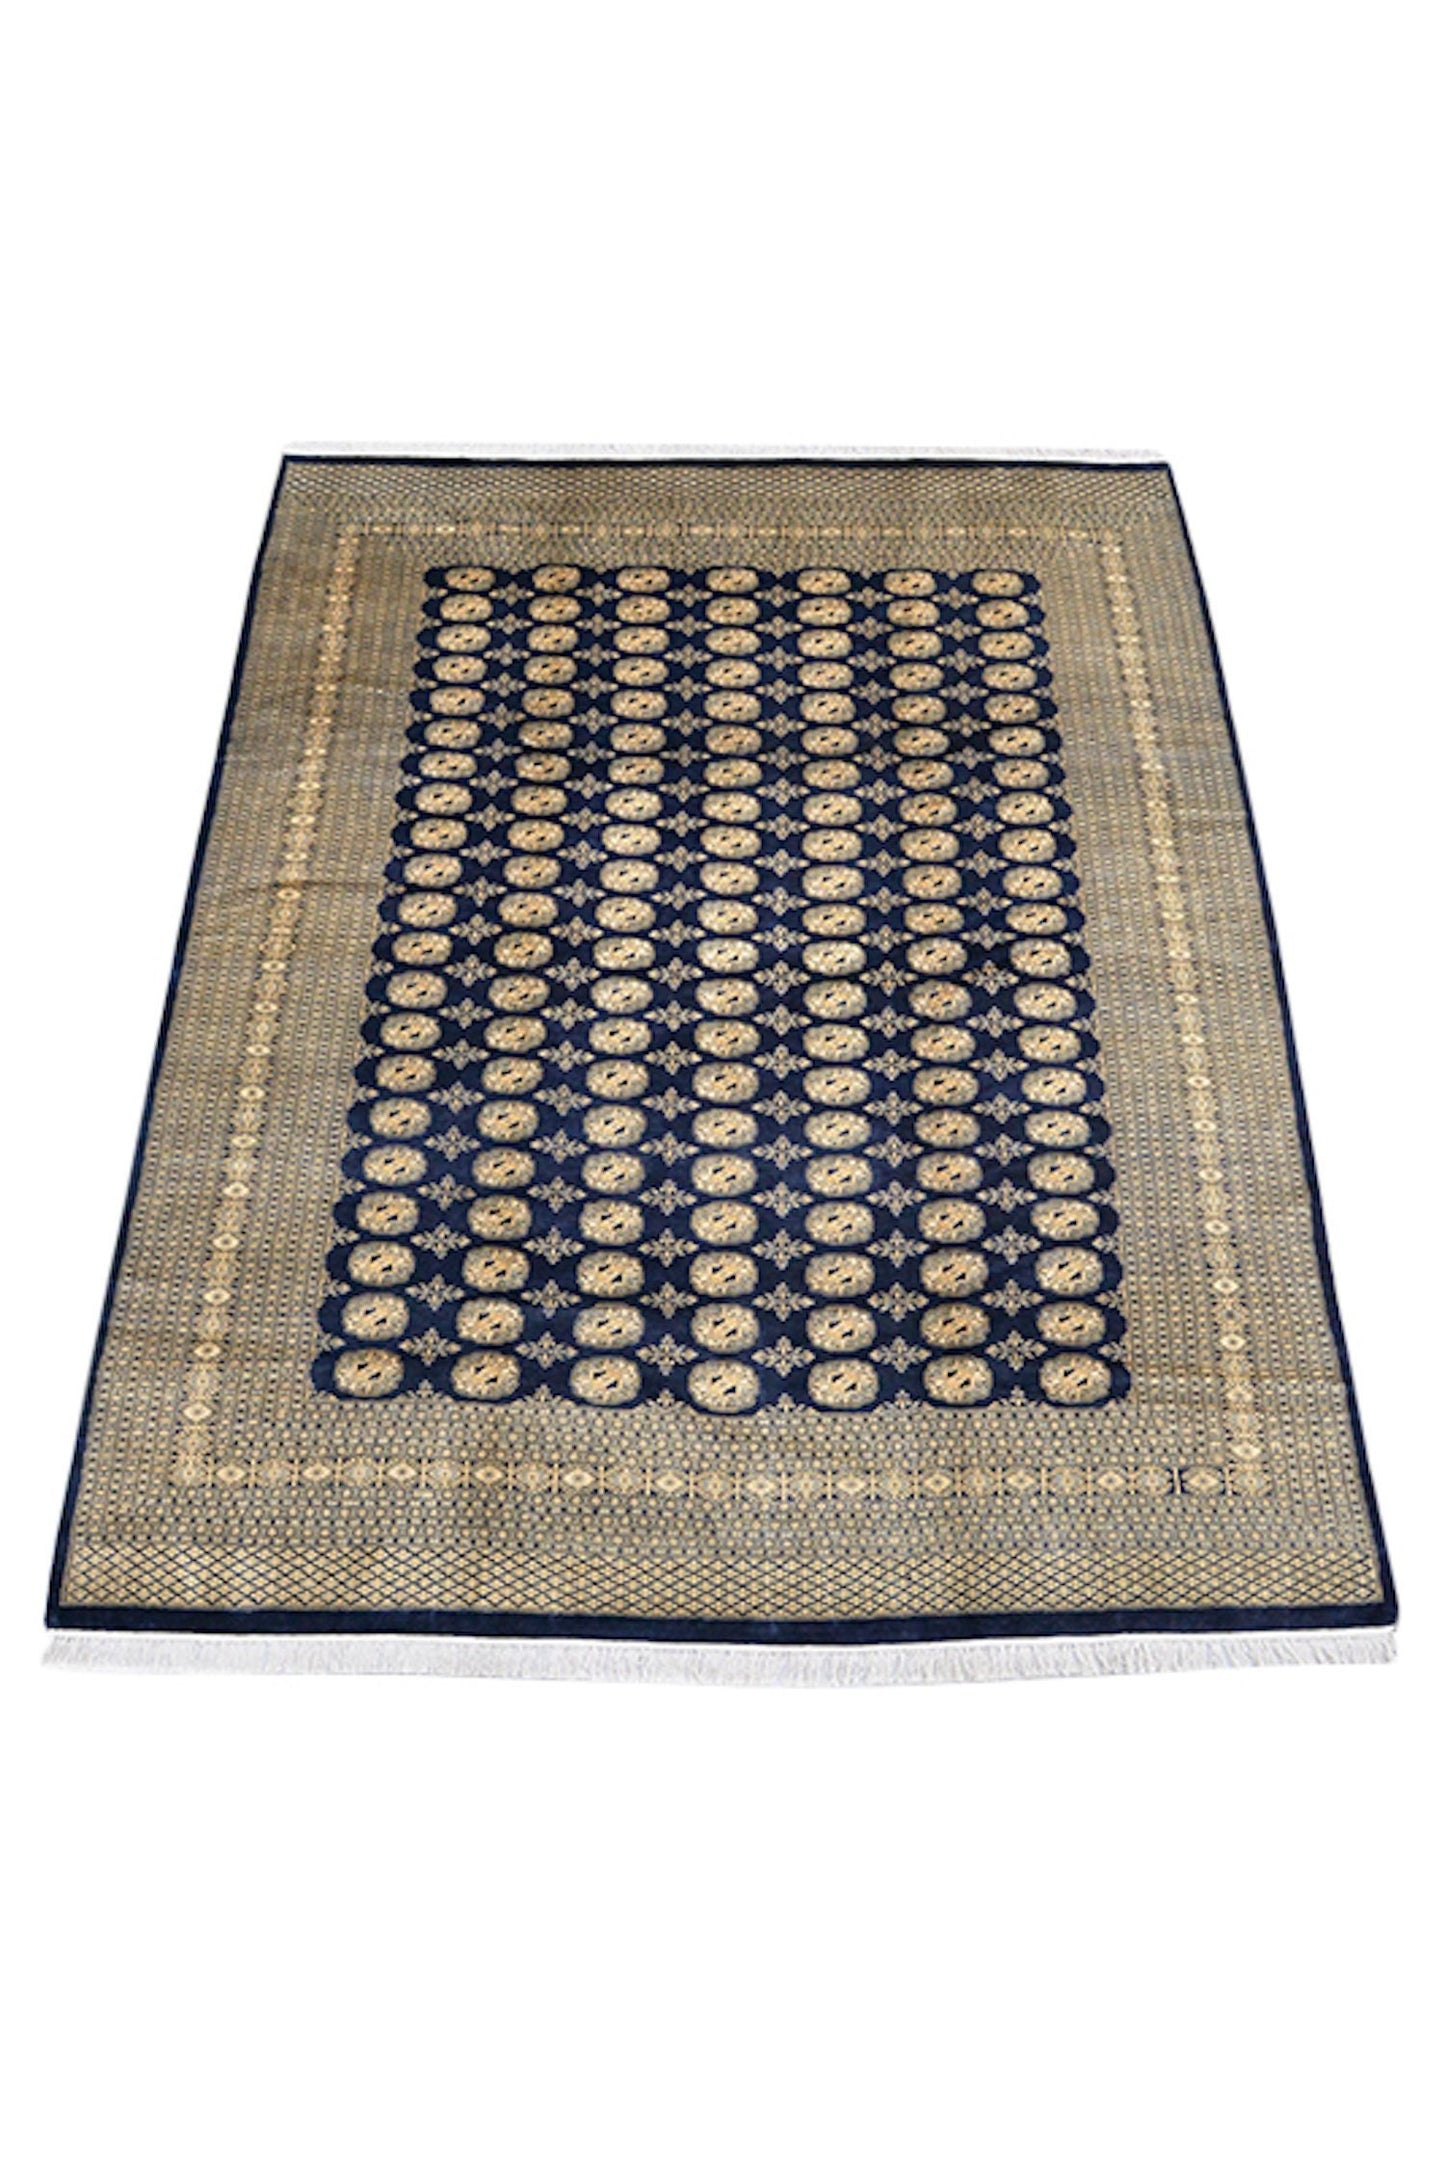 Navy Yellow Antique Rug, 8x10 Ft, Oriental Classic Rug, Large Bordered Traditional Rug, Wool Handwoven